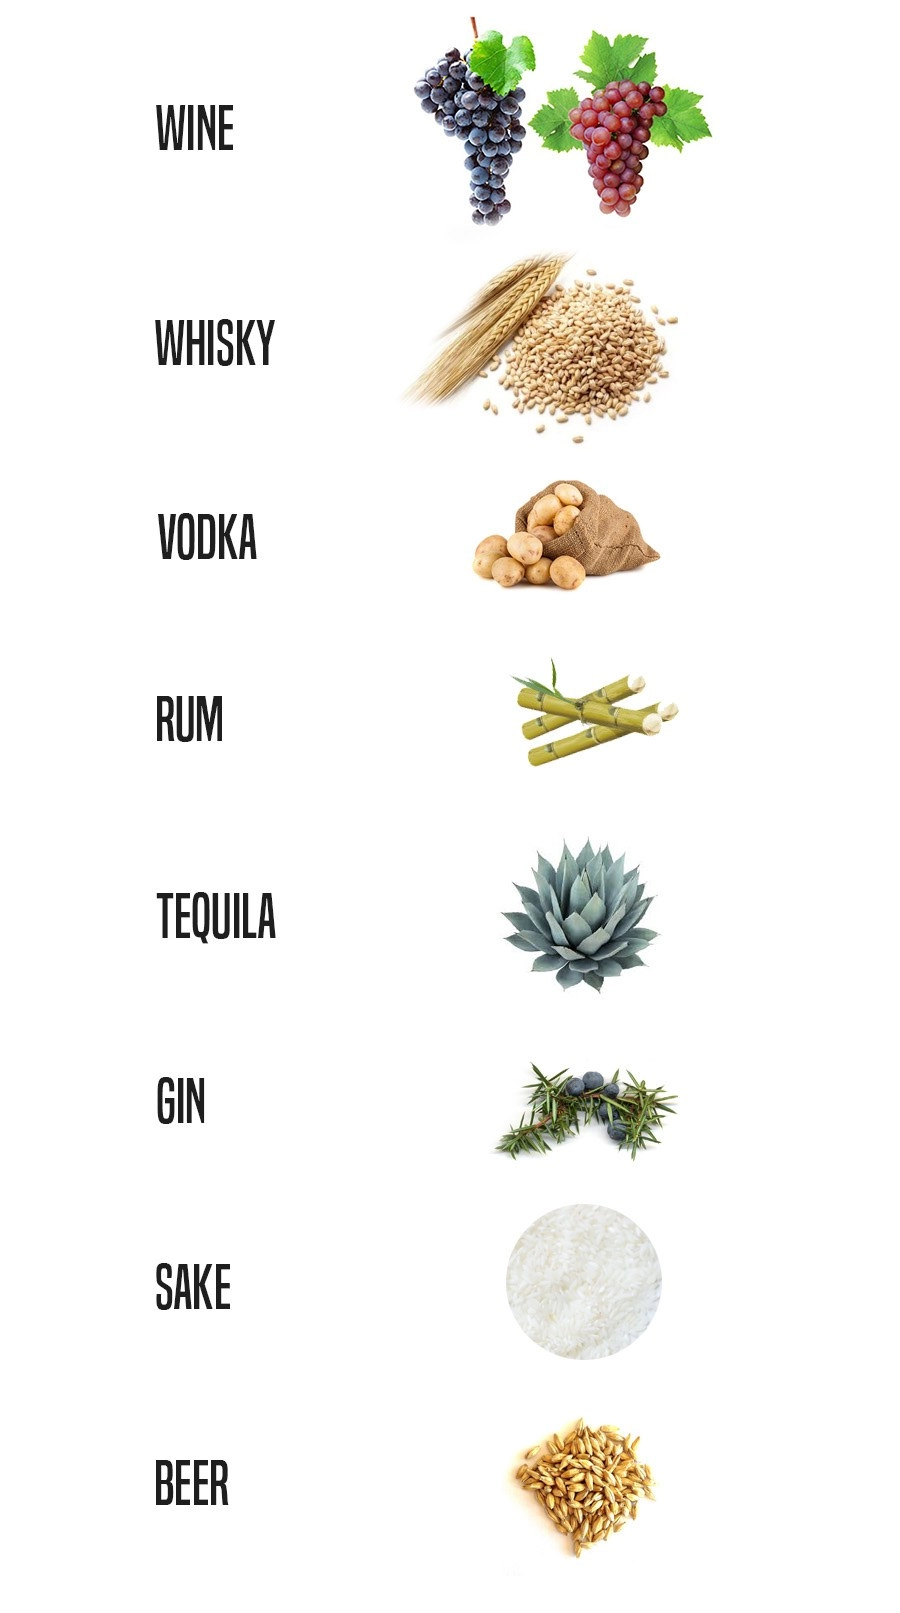 Liqueurs and Spirits: How to Tell the Difference